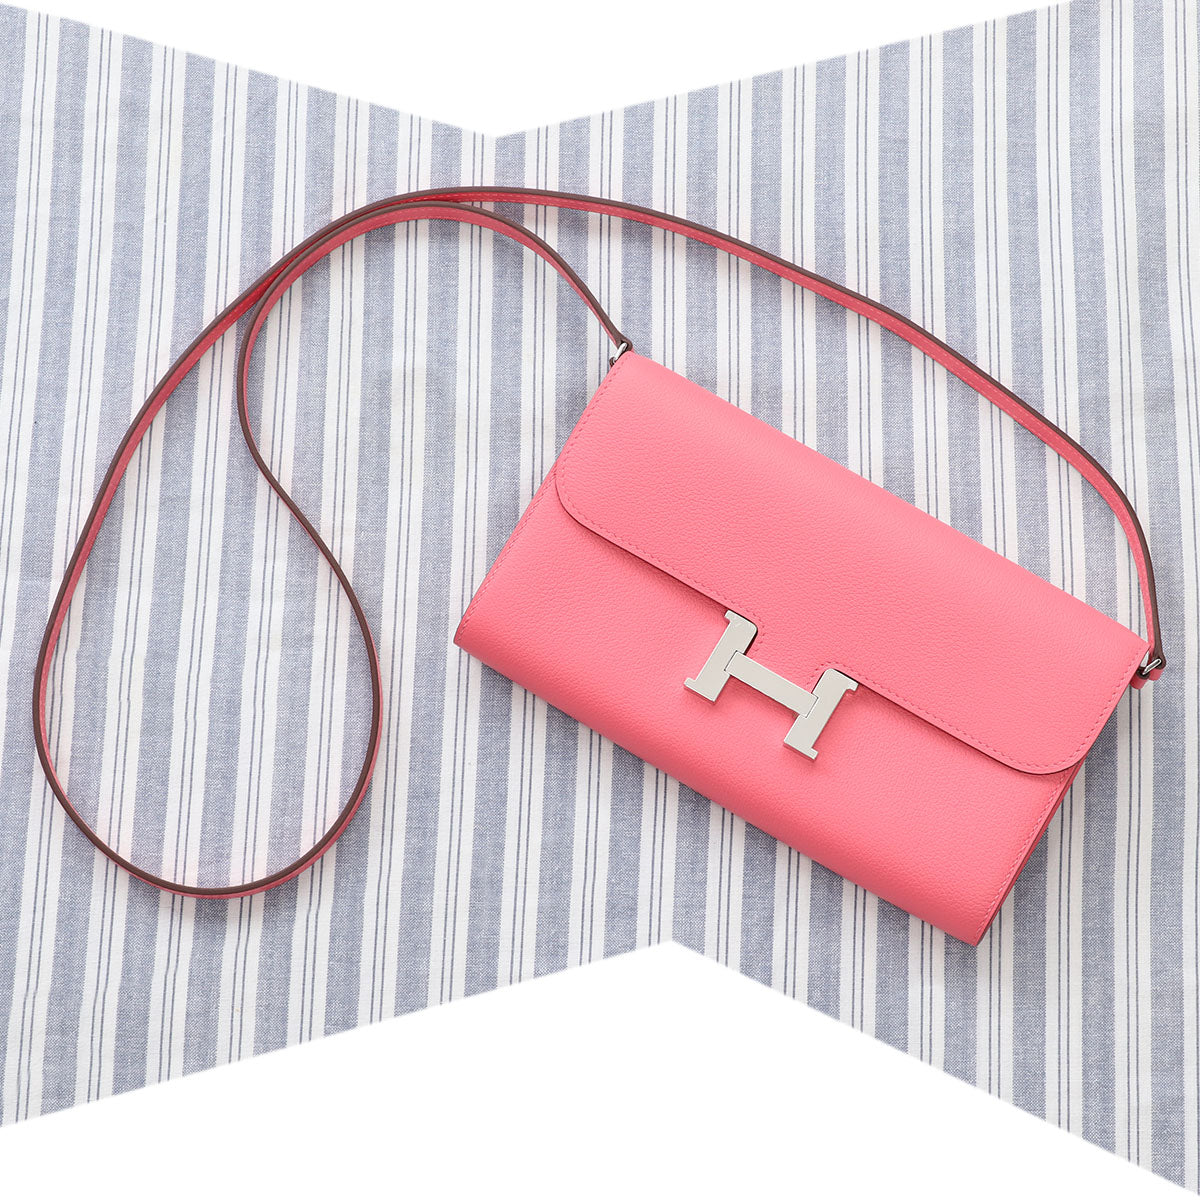 Constance To Go Wallet rose texas with enamel hardware - HERMÈS